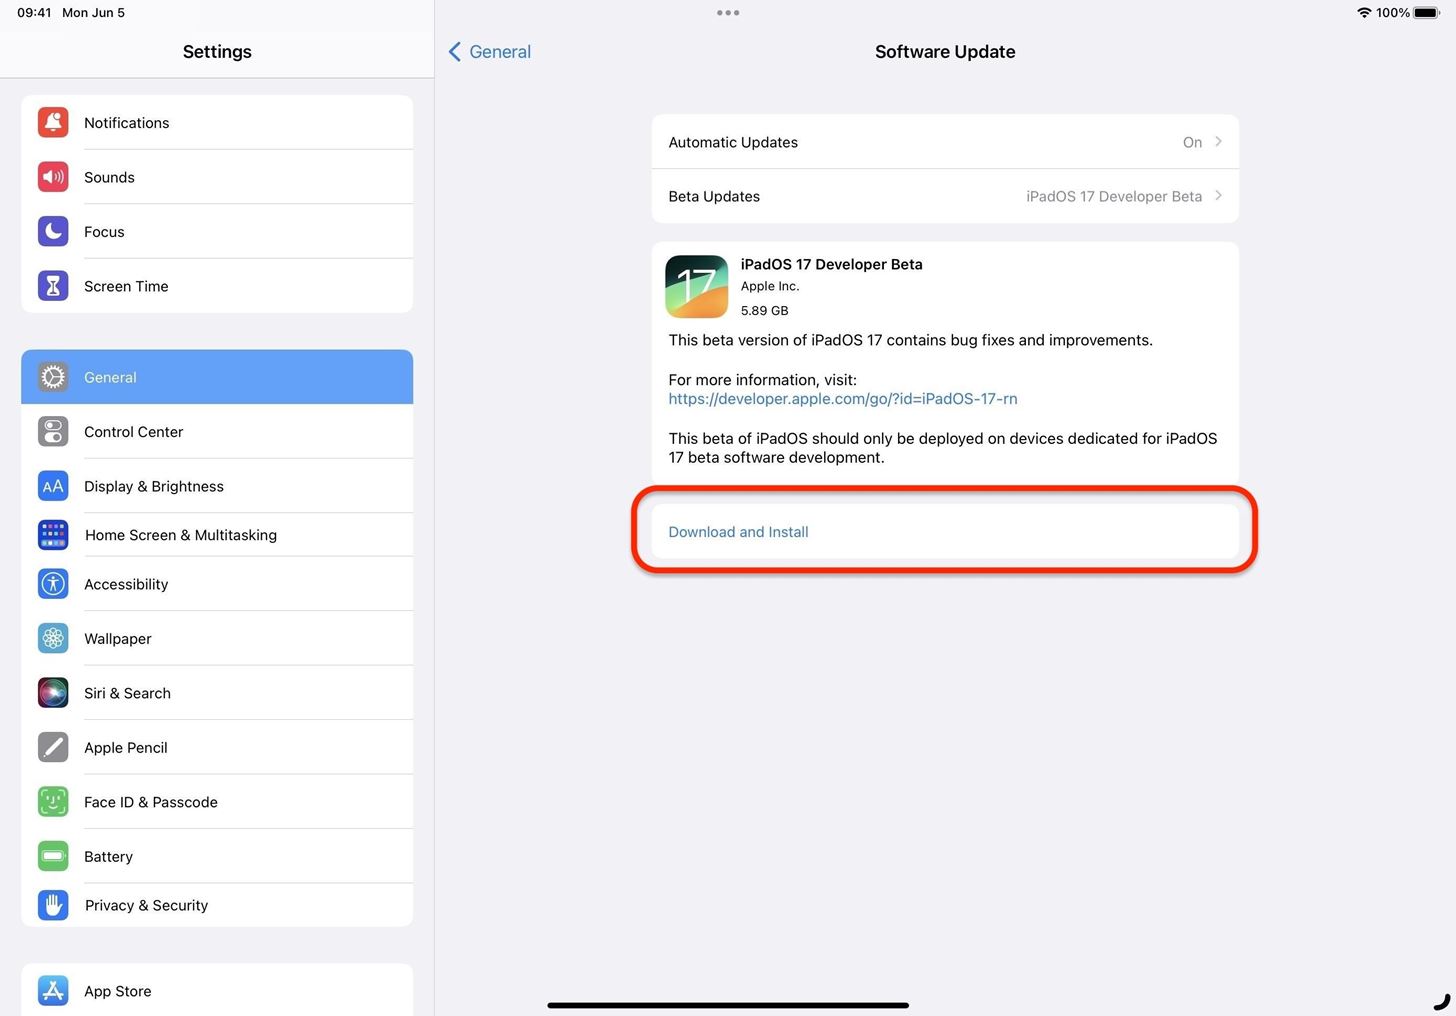 How to Download and Install iPadOS 17.4 Beta to Try New iPad Features Before Everyone Else